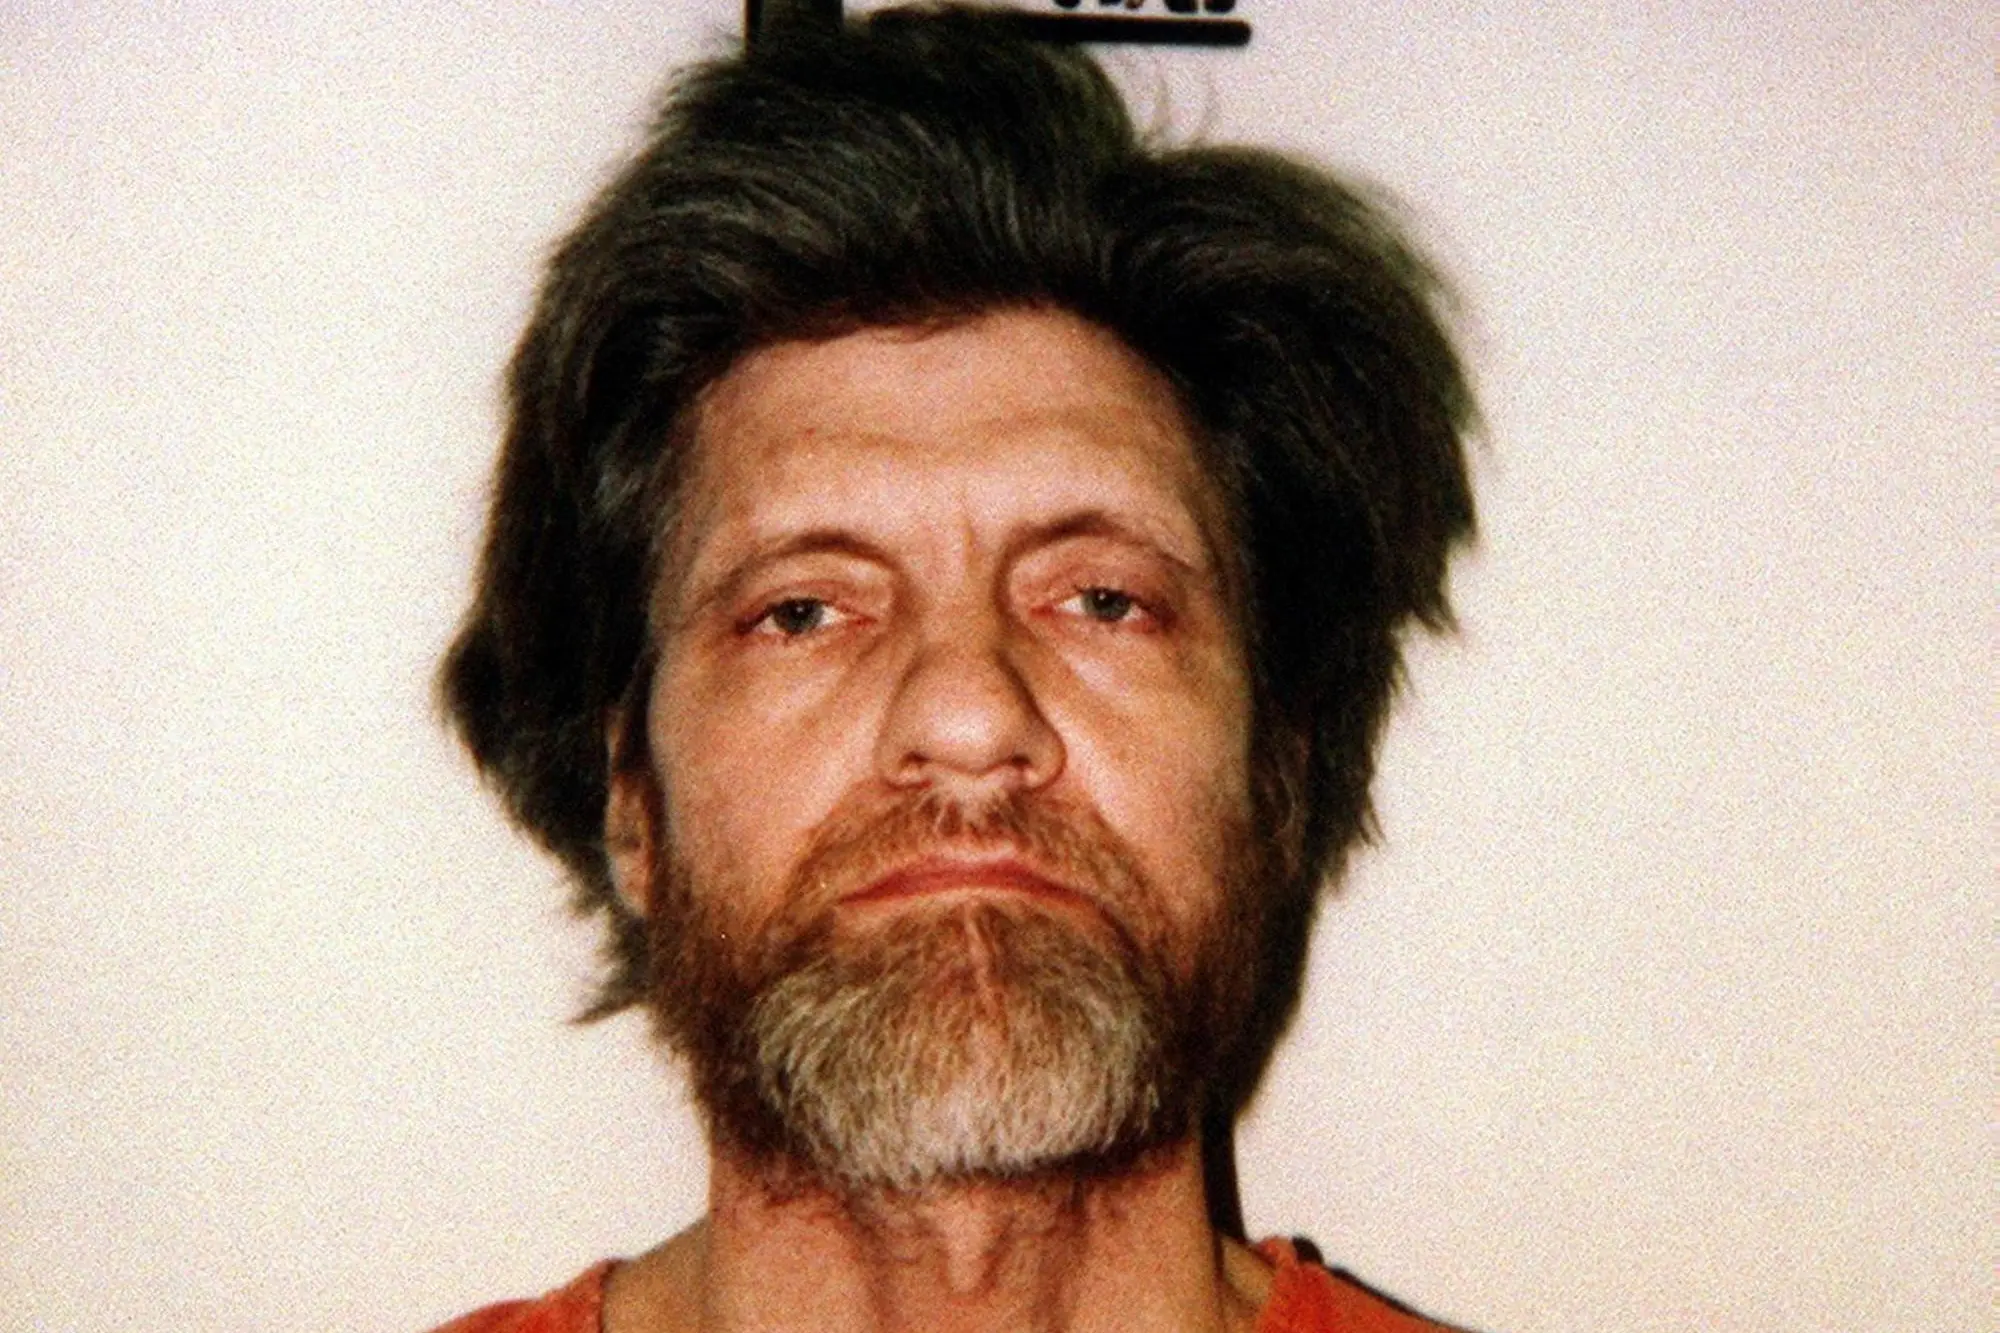 Picture released 05 April 1996 by the Lewis and Clark jail shows Theodore Kaczynski in Helena, Montana. Theodore Kaczynski, who was accused of a 17-year bombing spree, was sentenced 04 May at Sacramento County Federal Court to three consecutive life sentences for killing three people and maming others during 18 years of letter bombings. Ansa /LEWIS AND CLARK JAIL